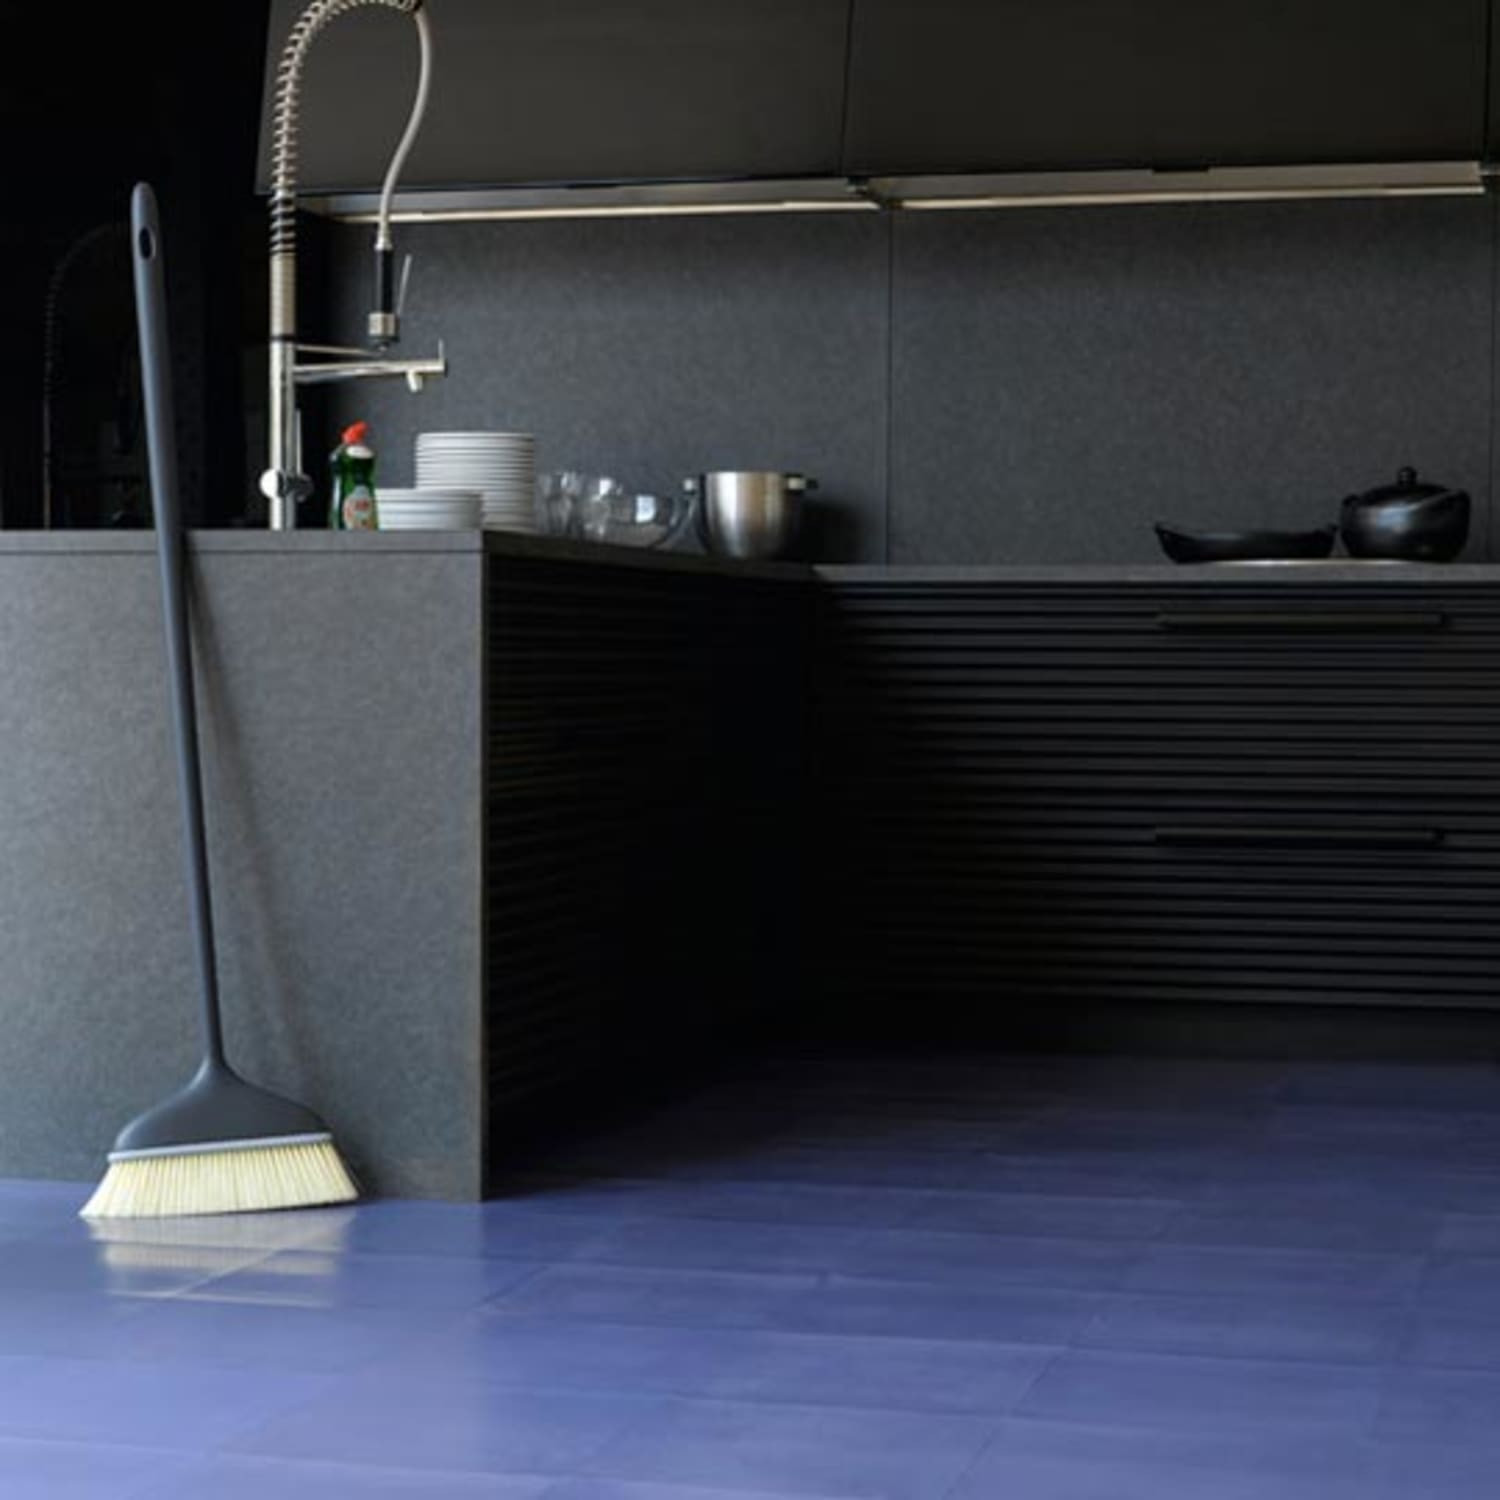 Rubber Flooring For Kitchen
 All About Rubber Kitchen Floors